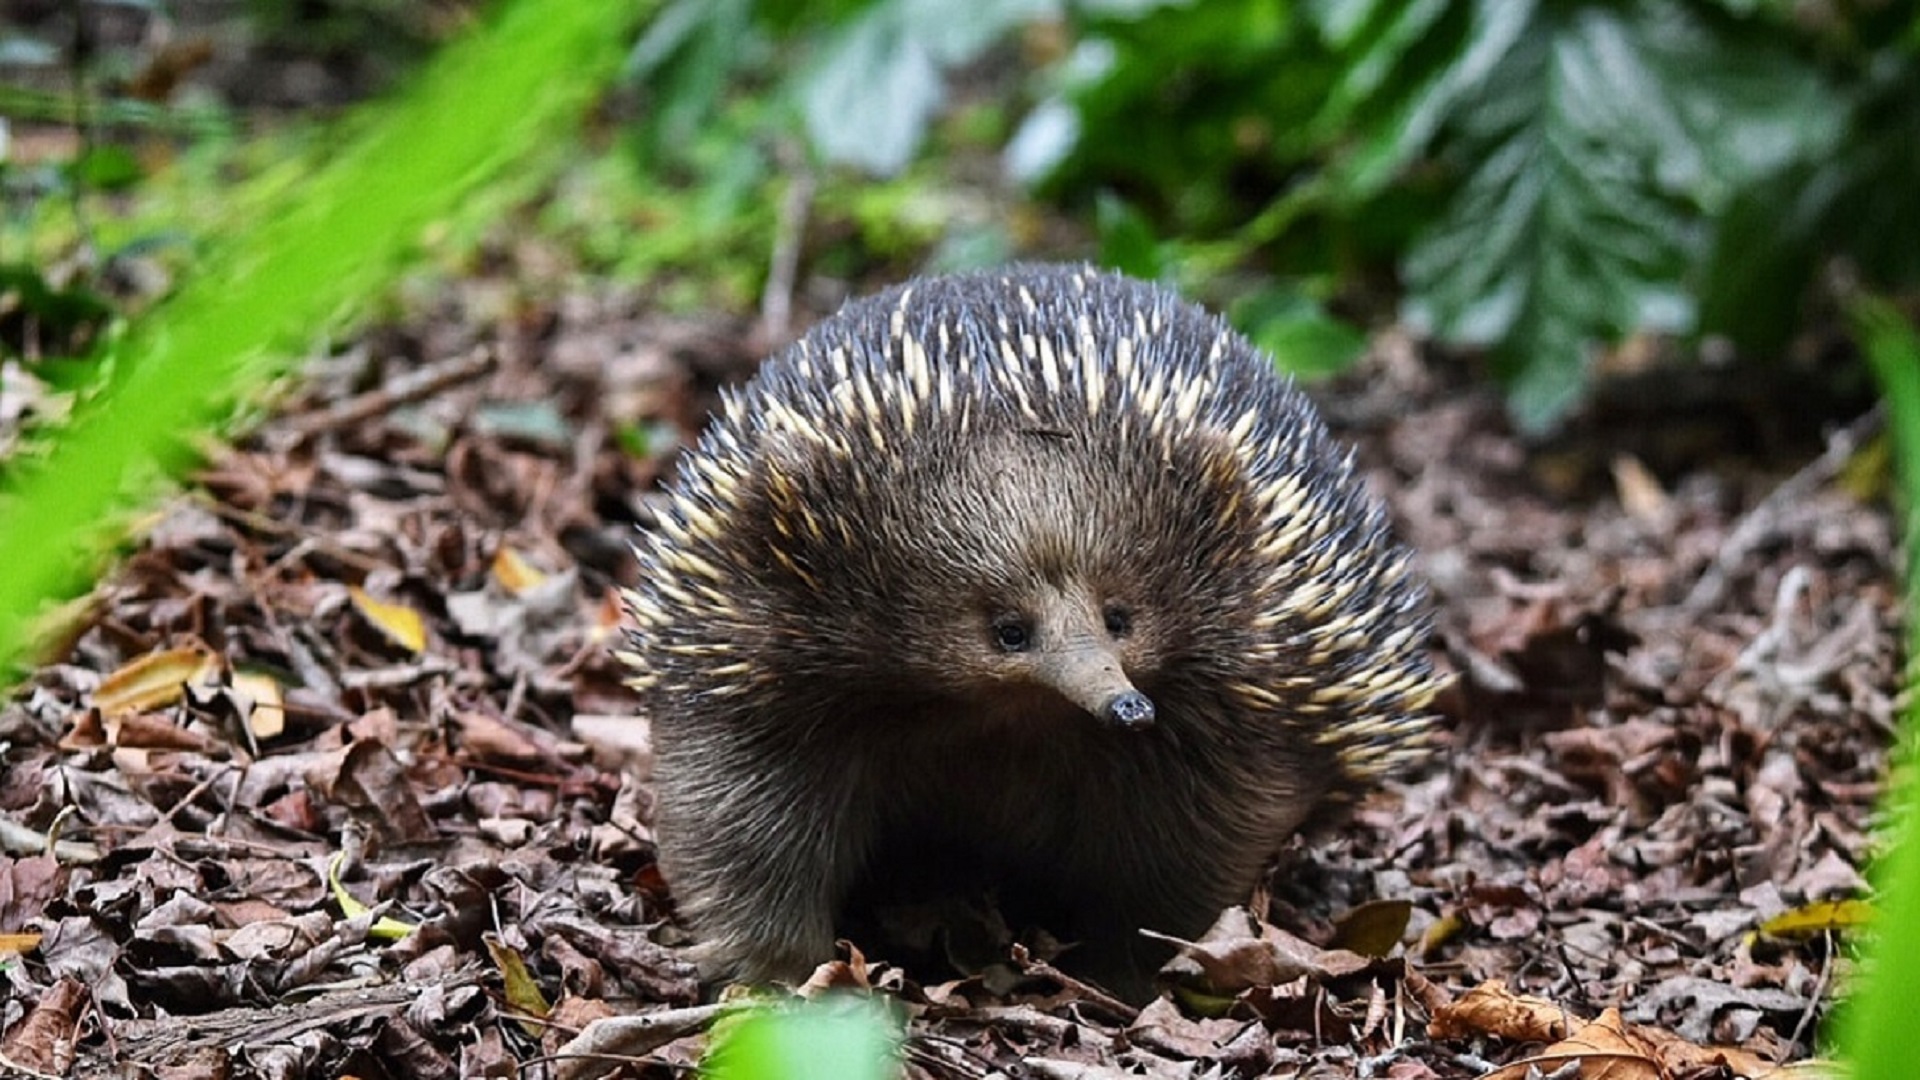 Echidna sitting on leaves